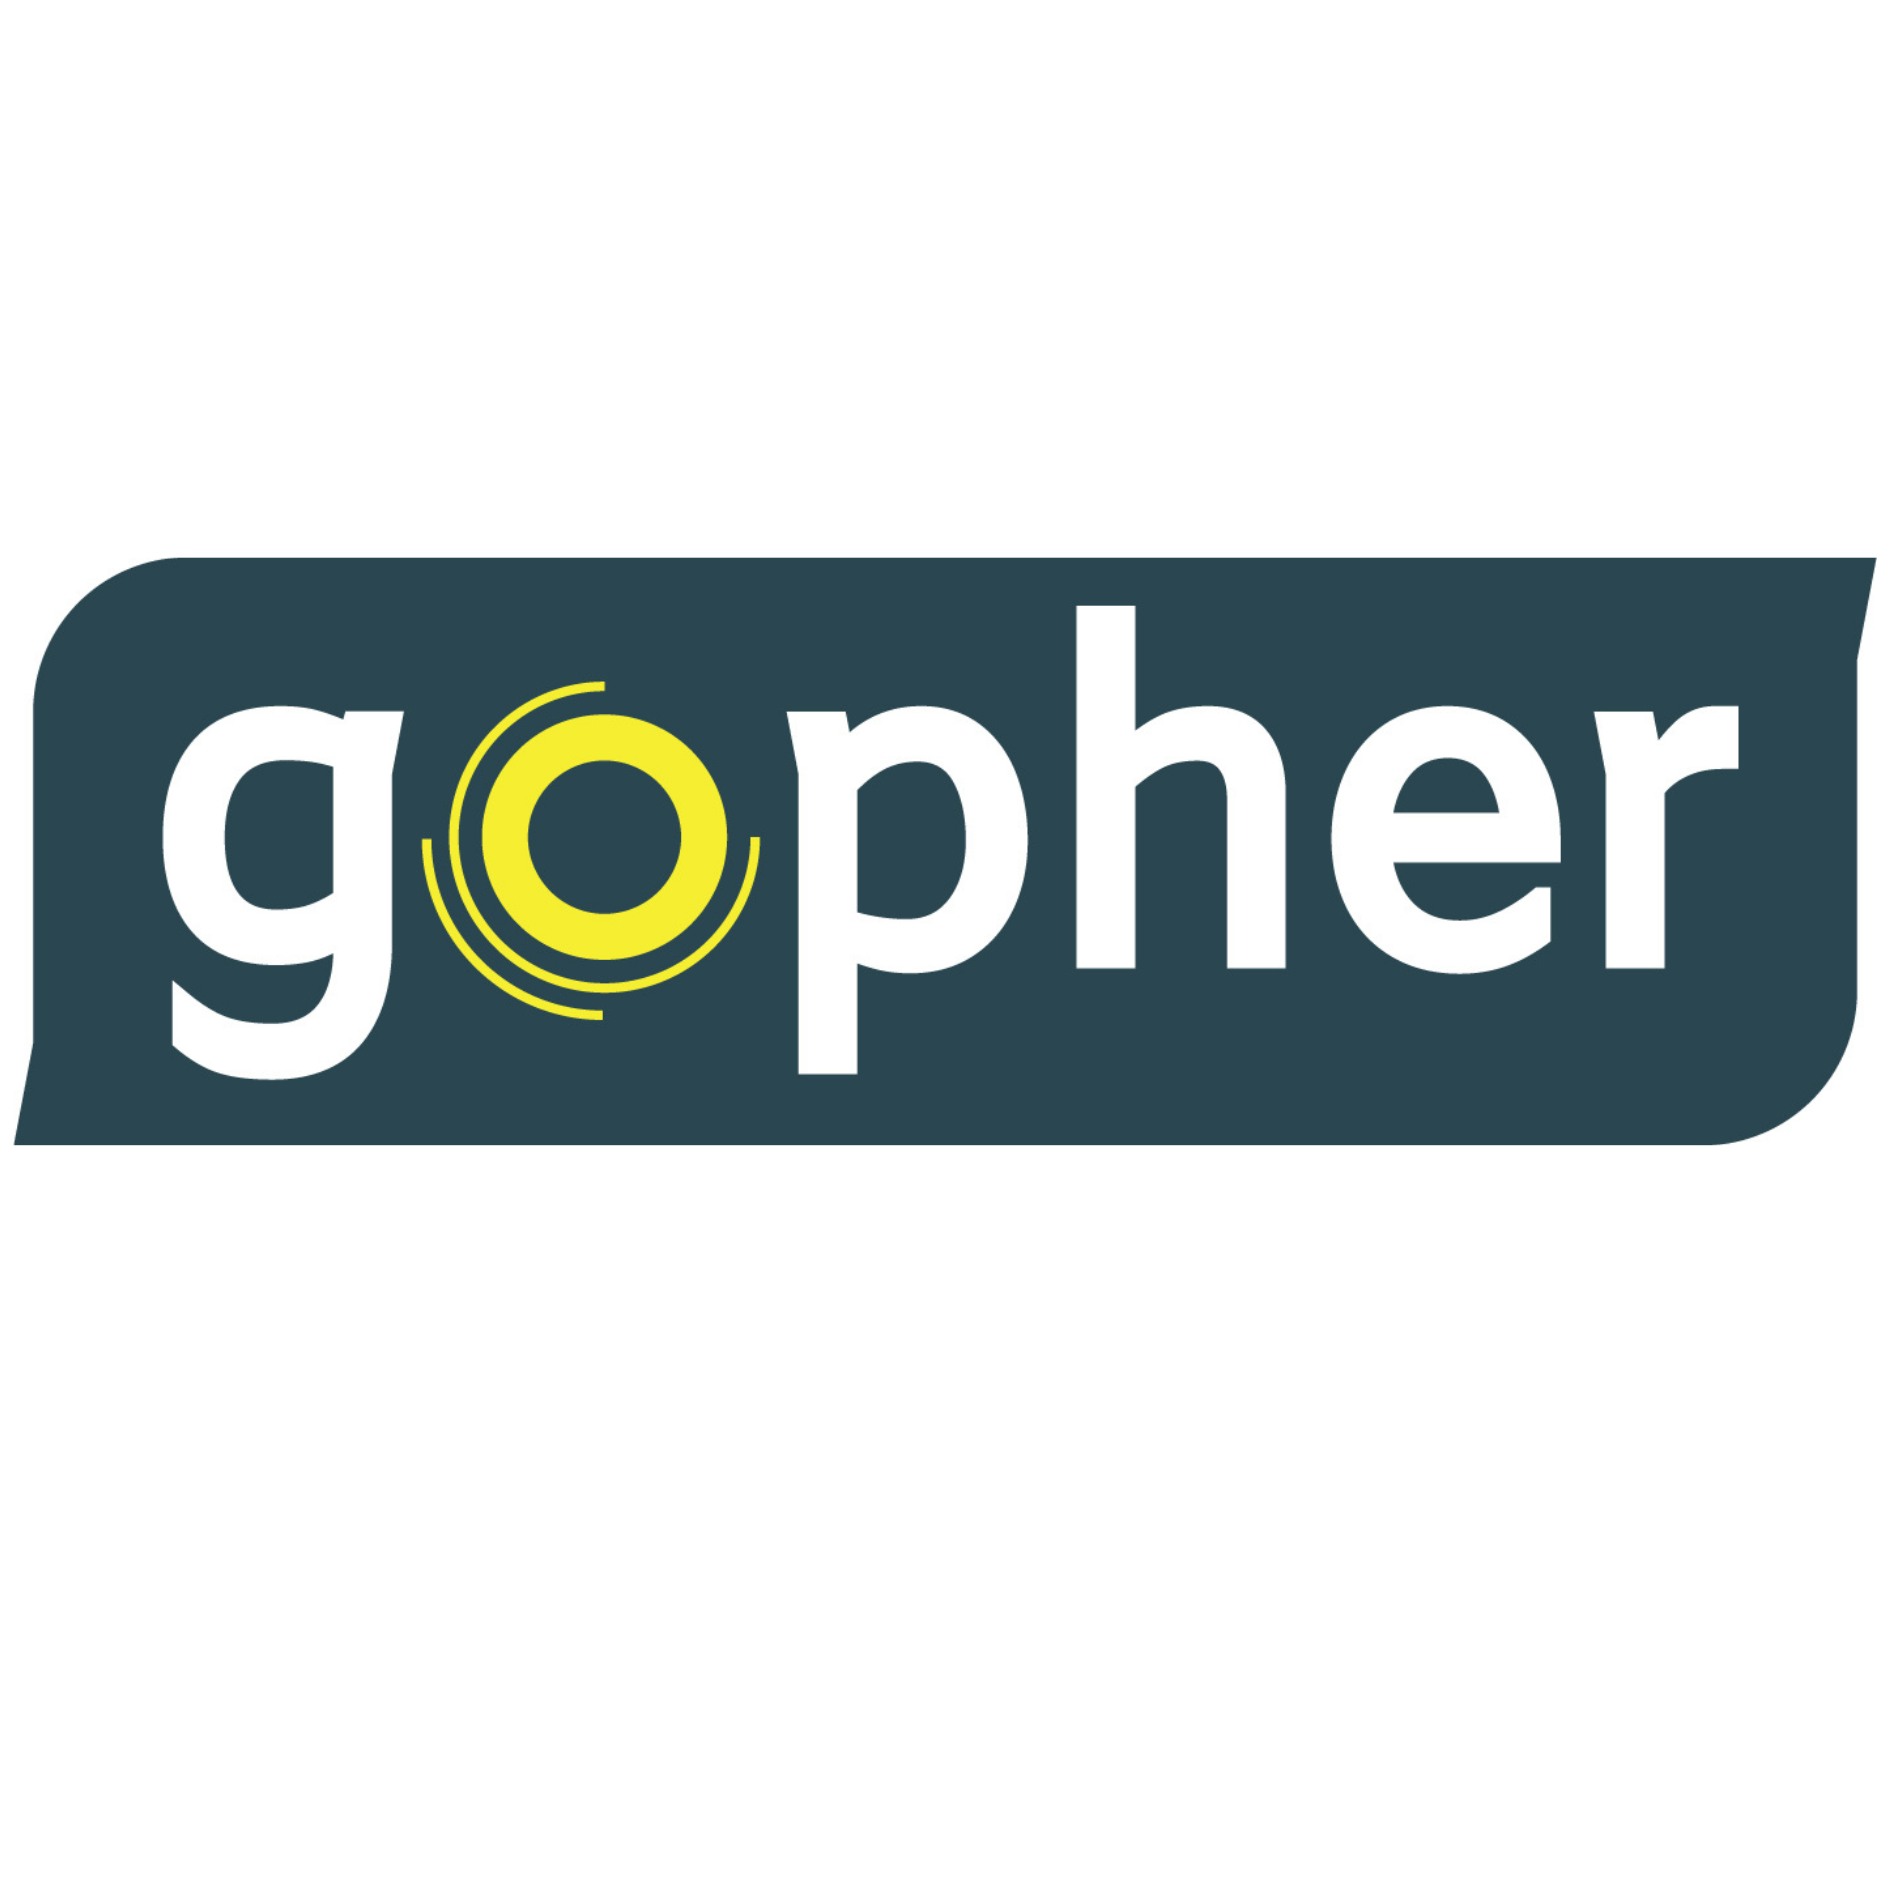 Wordmark for Gopher with white letters and yellow "o"